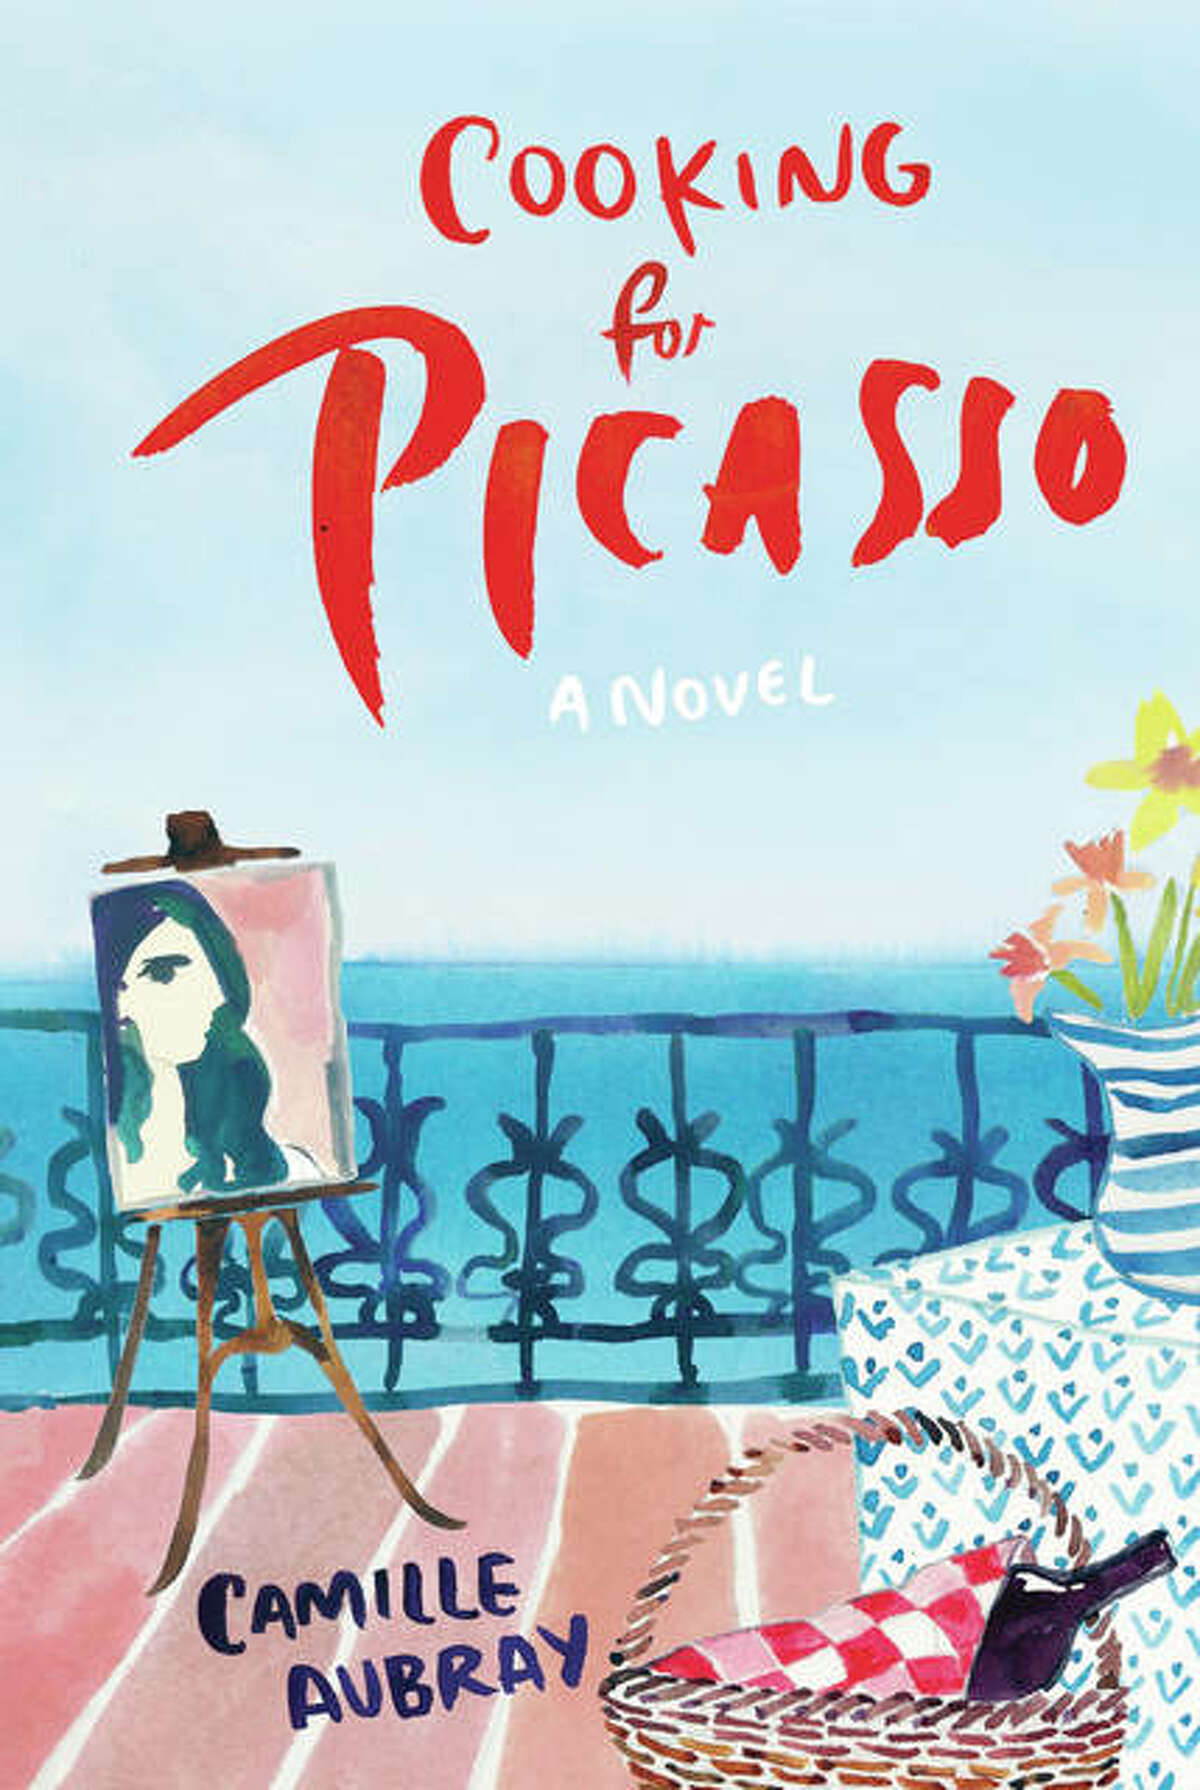 Camille Aubray’s novel “Cooking with Picasso” is inspiration for the first session in Springfield Art Association’s upcoming Canvas & Cocktails evenings.